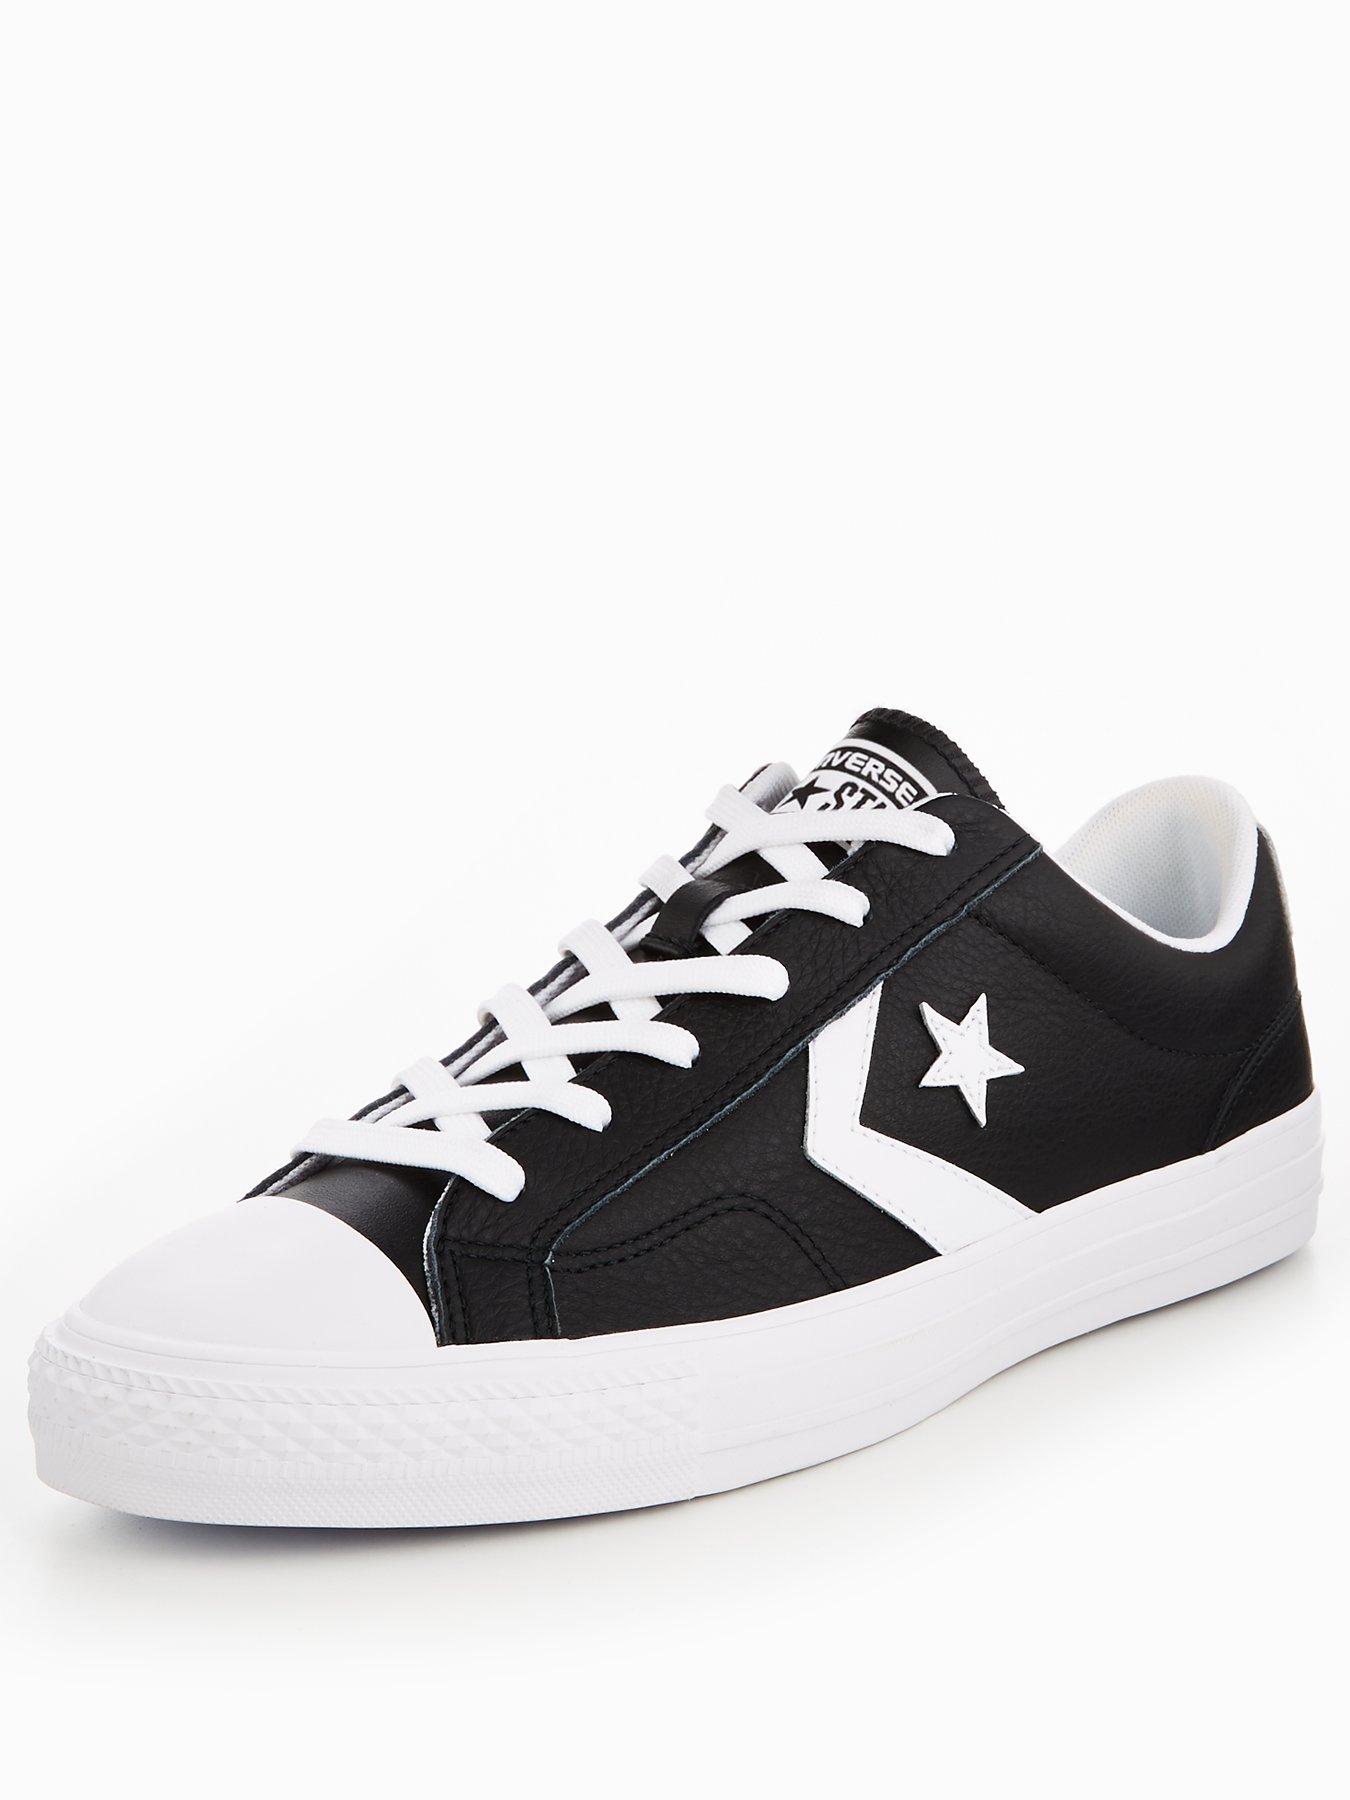 star player leather ox converse